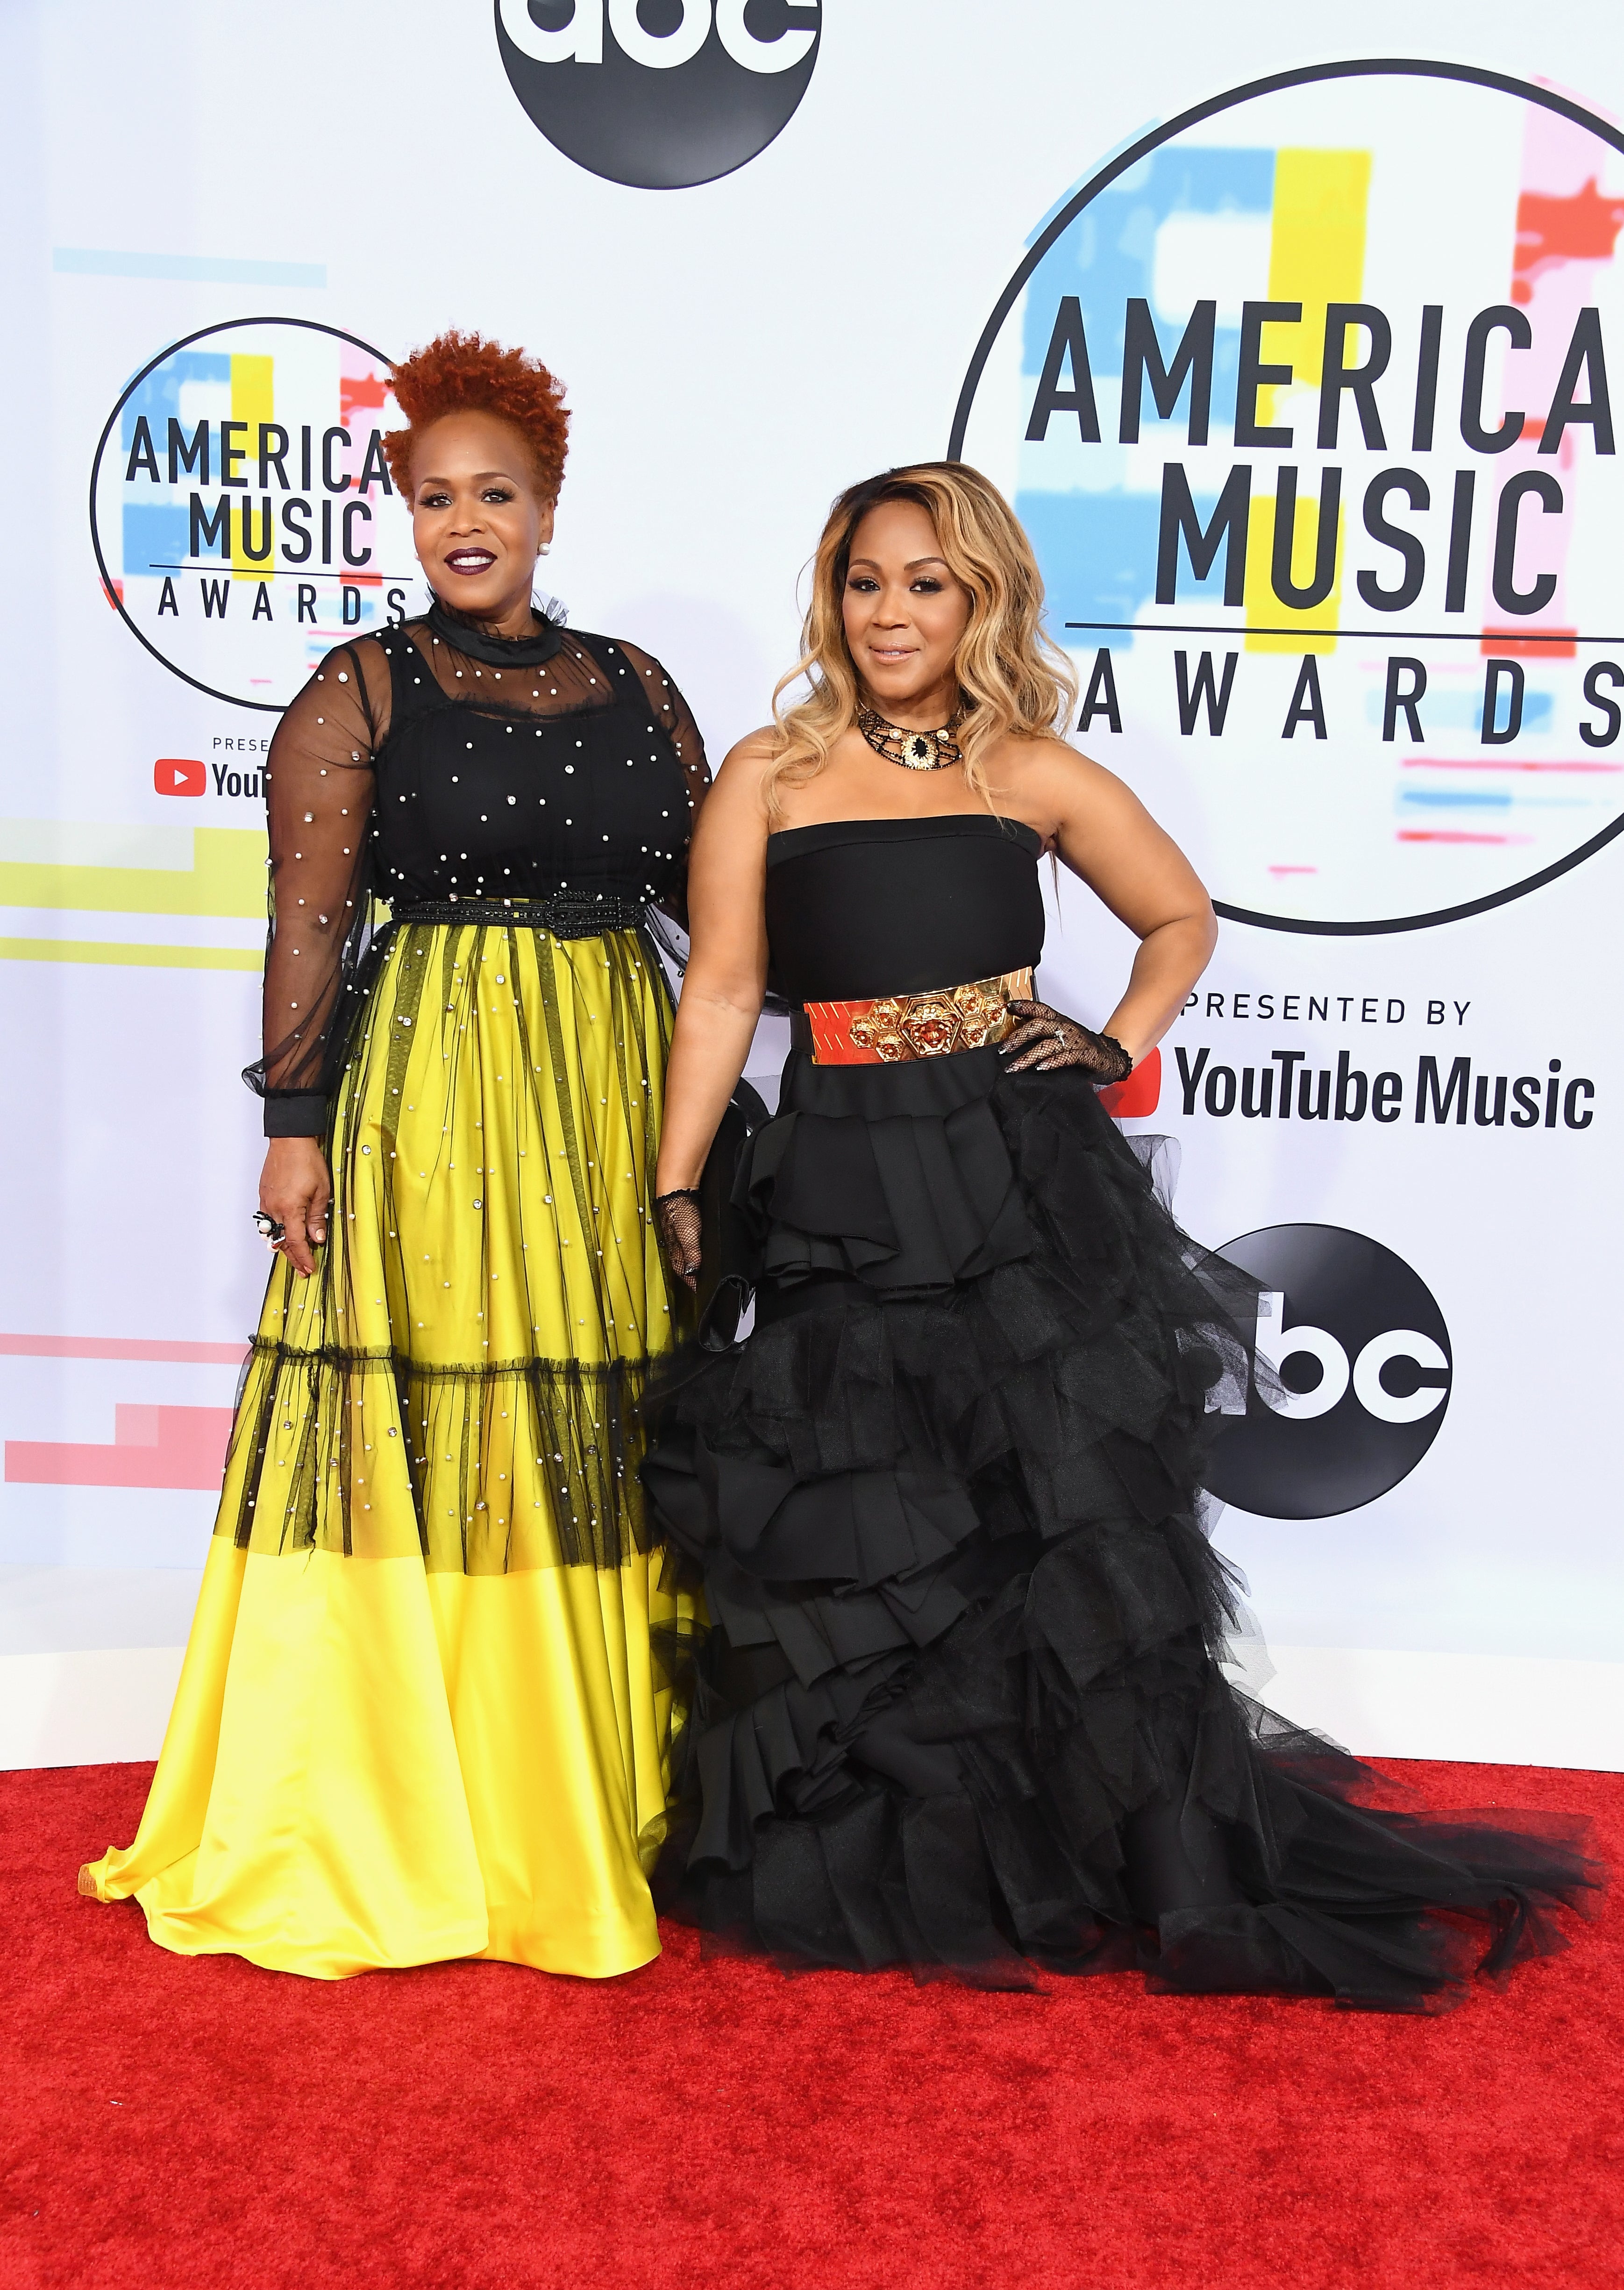 Tracee Ellis Ross, Cardi B And Many More Slayed The 2018 American Music Awards Red Carpet